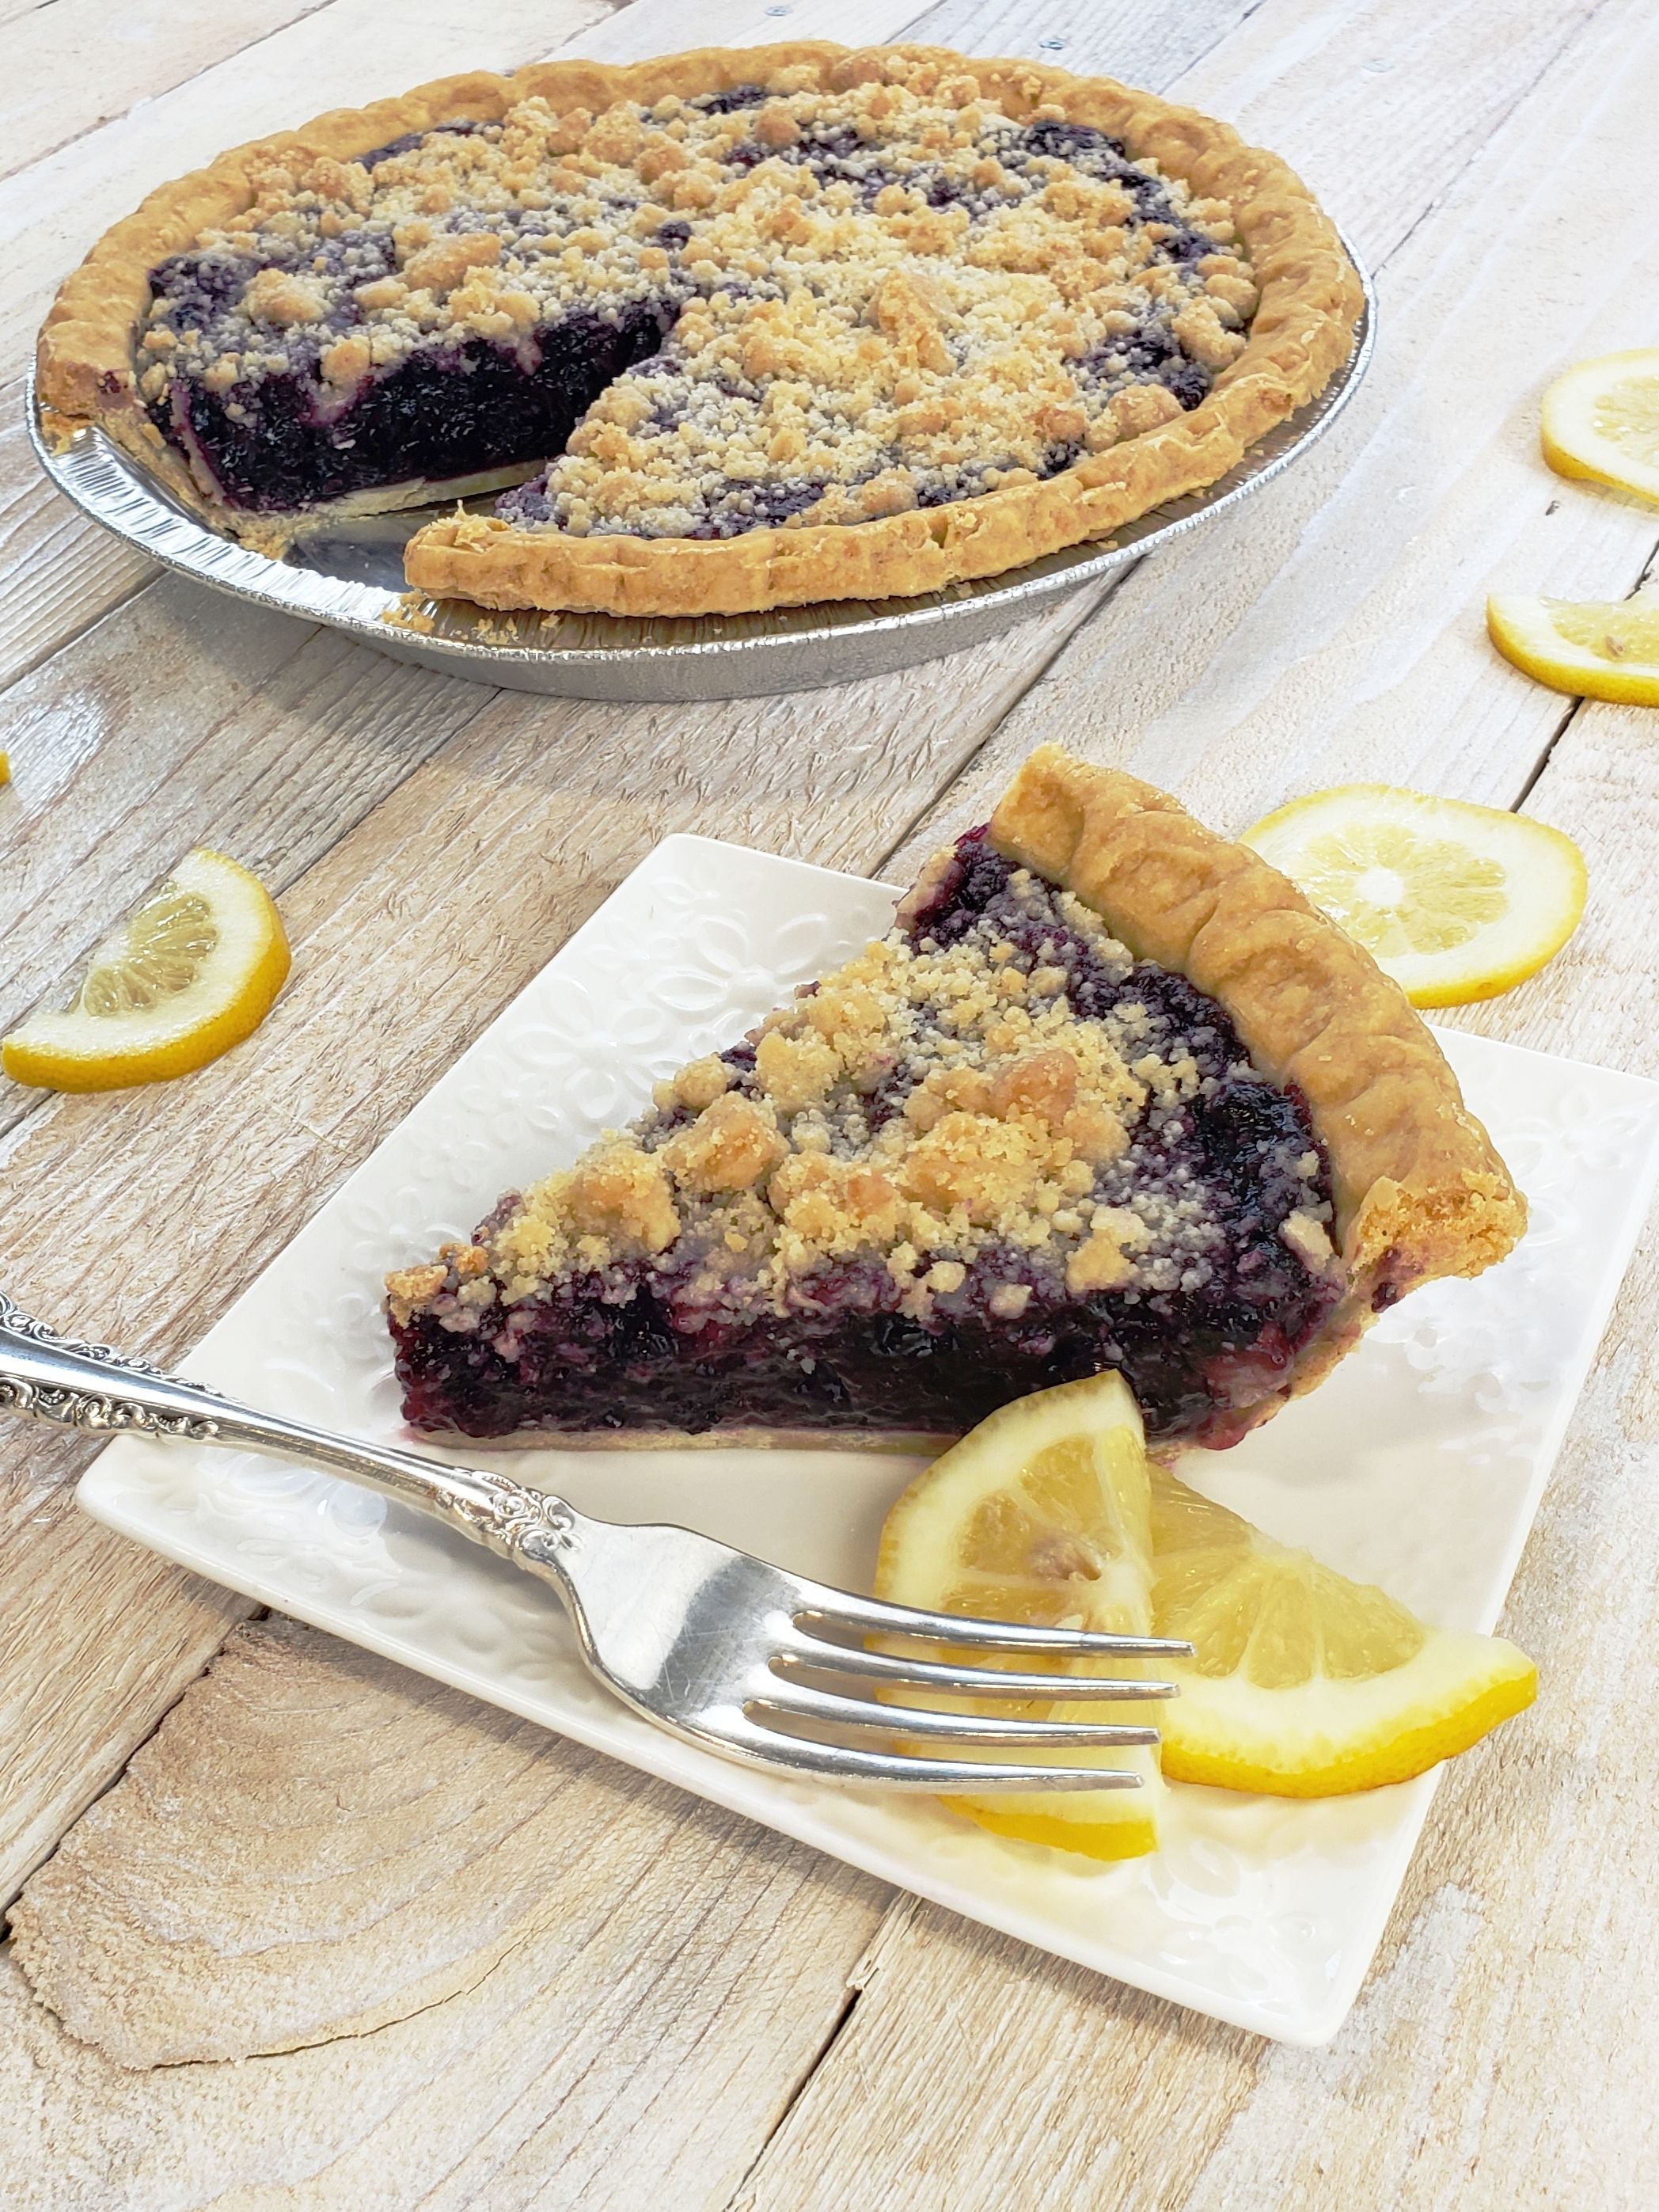 Slice of Blueberry Lemon Vodka pie, garnished with lemon slices and a crumb topping, in front of an 8" pie from which it was cut.